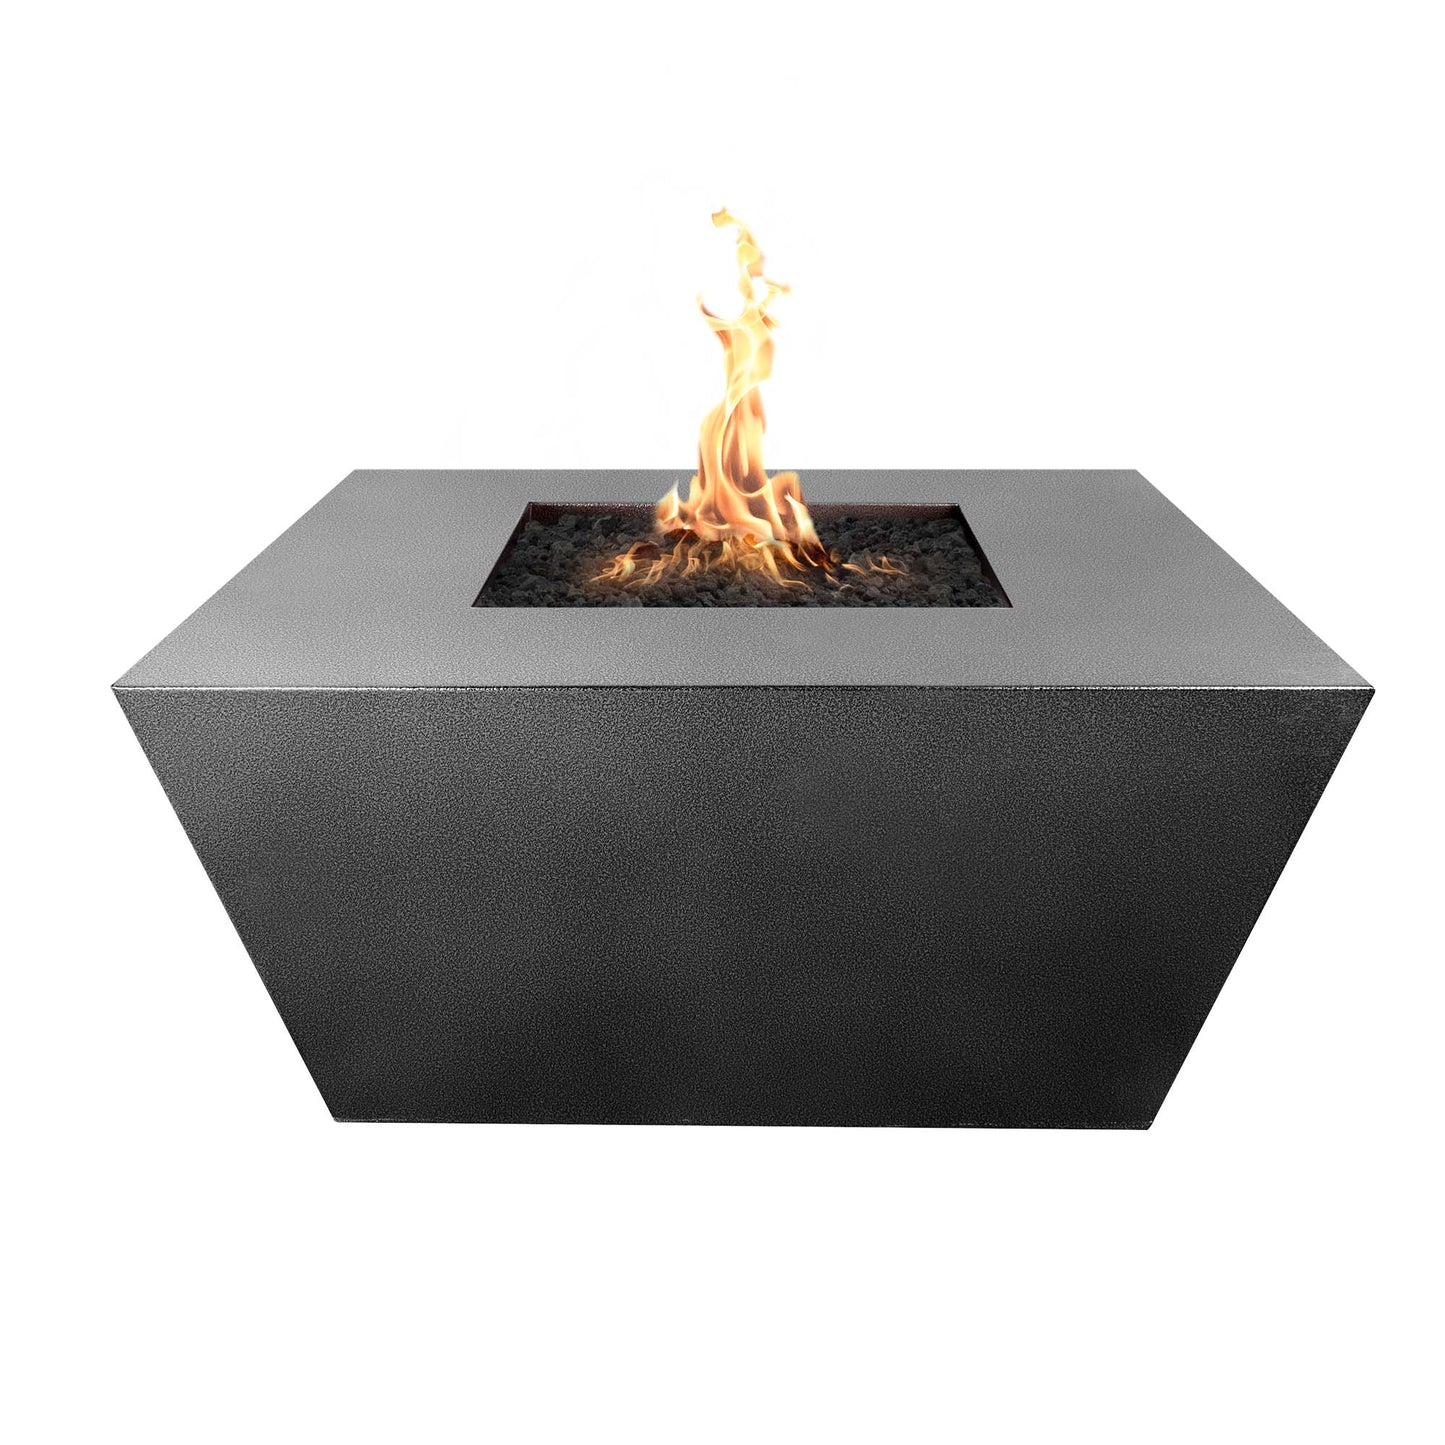 The Outdoor Plus Square Redan 36" Stainless Steel Liquid Propane Fire Pit with Match Lit Ignition